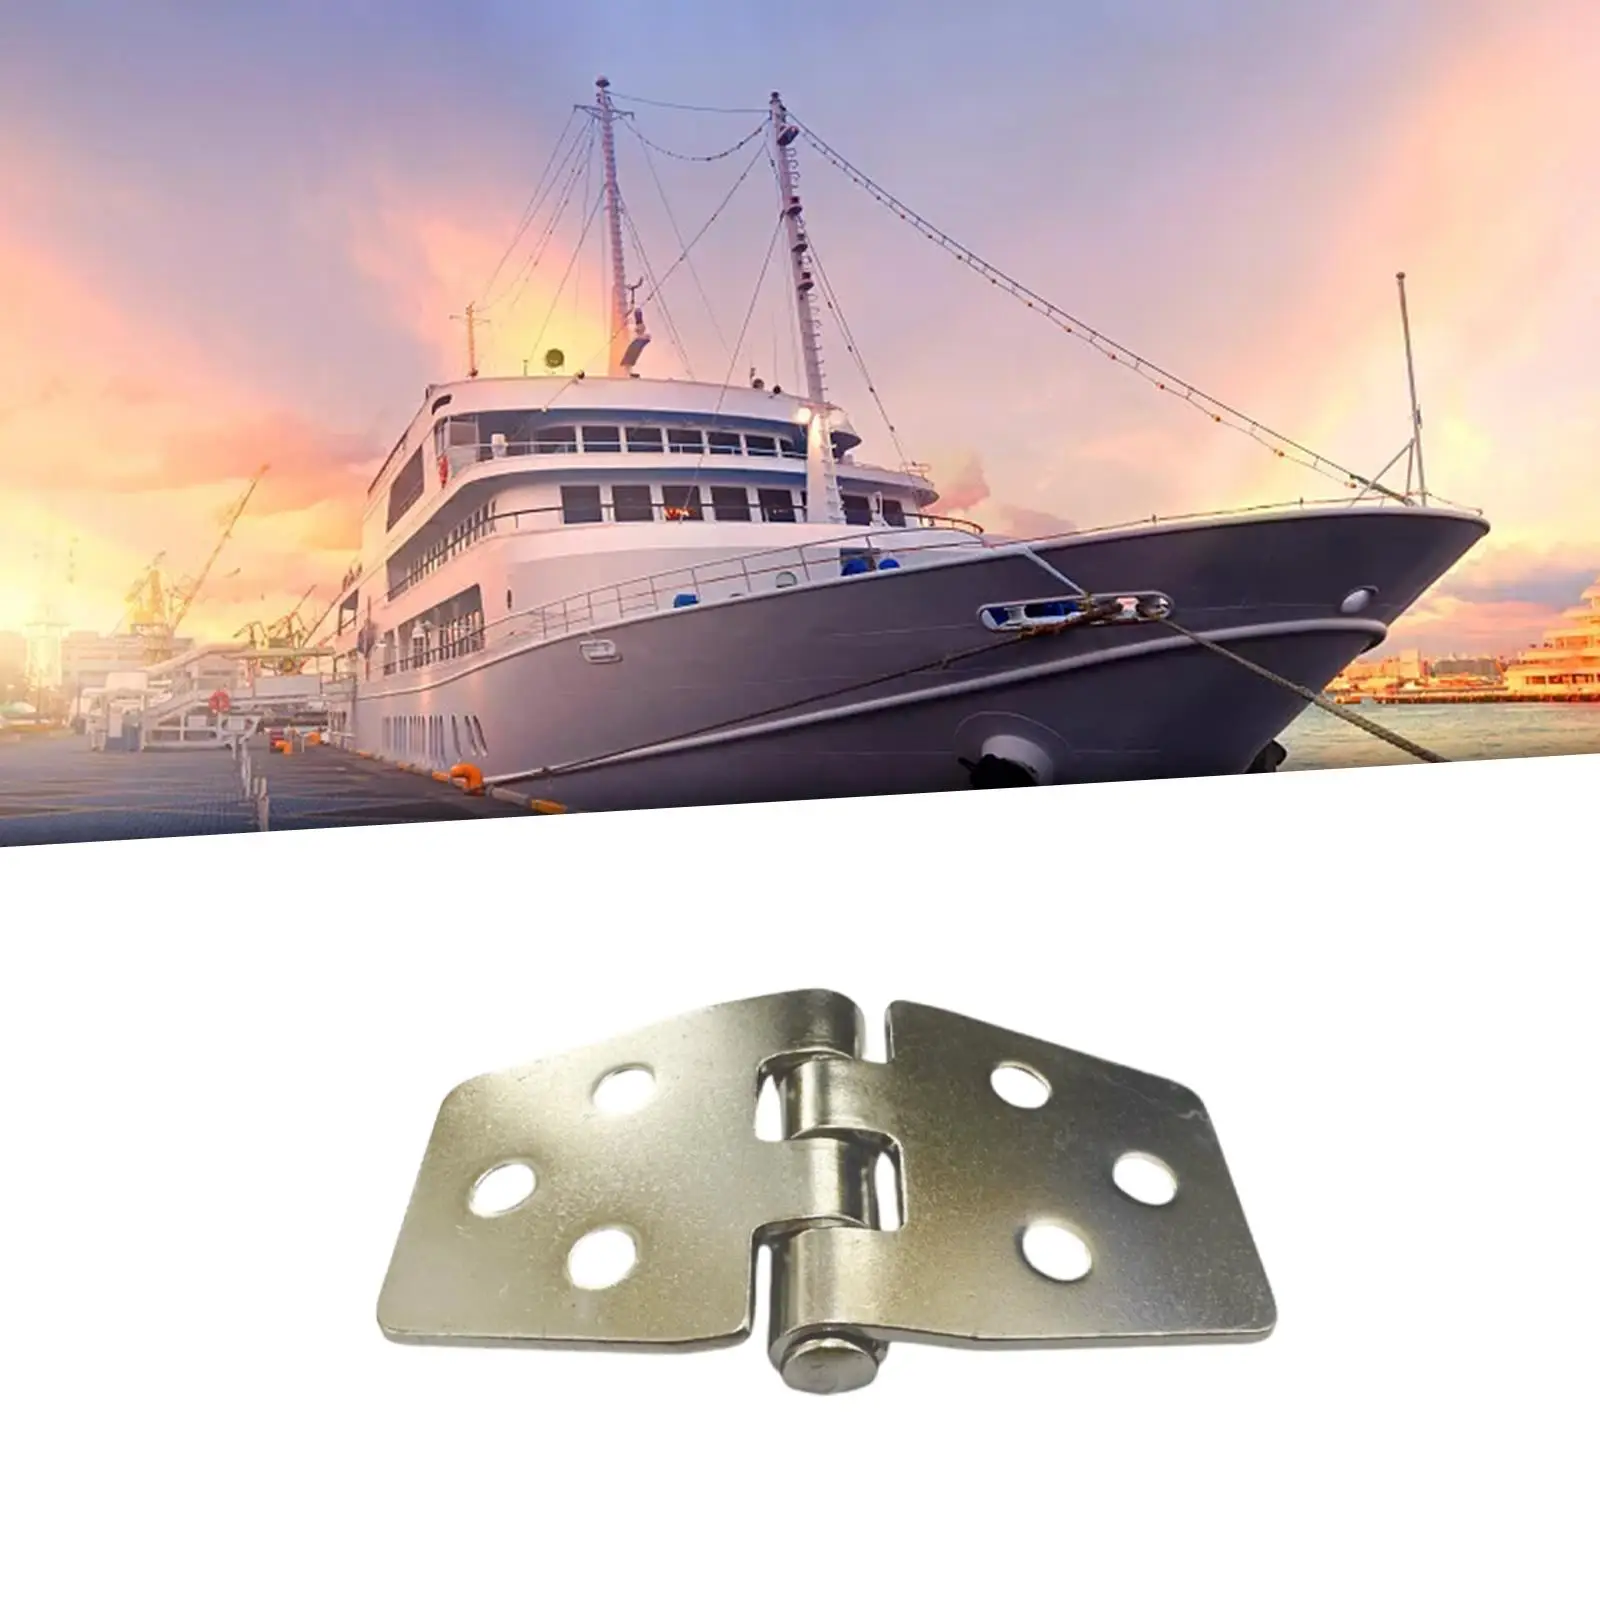 Boat Strap Hinge Smooth Sides Accessories High Performance Matte Quality Cabinet Door Hinges for Yacht Cabinet Door Boat RV